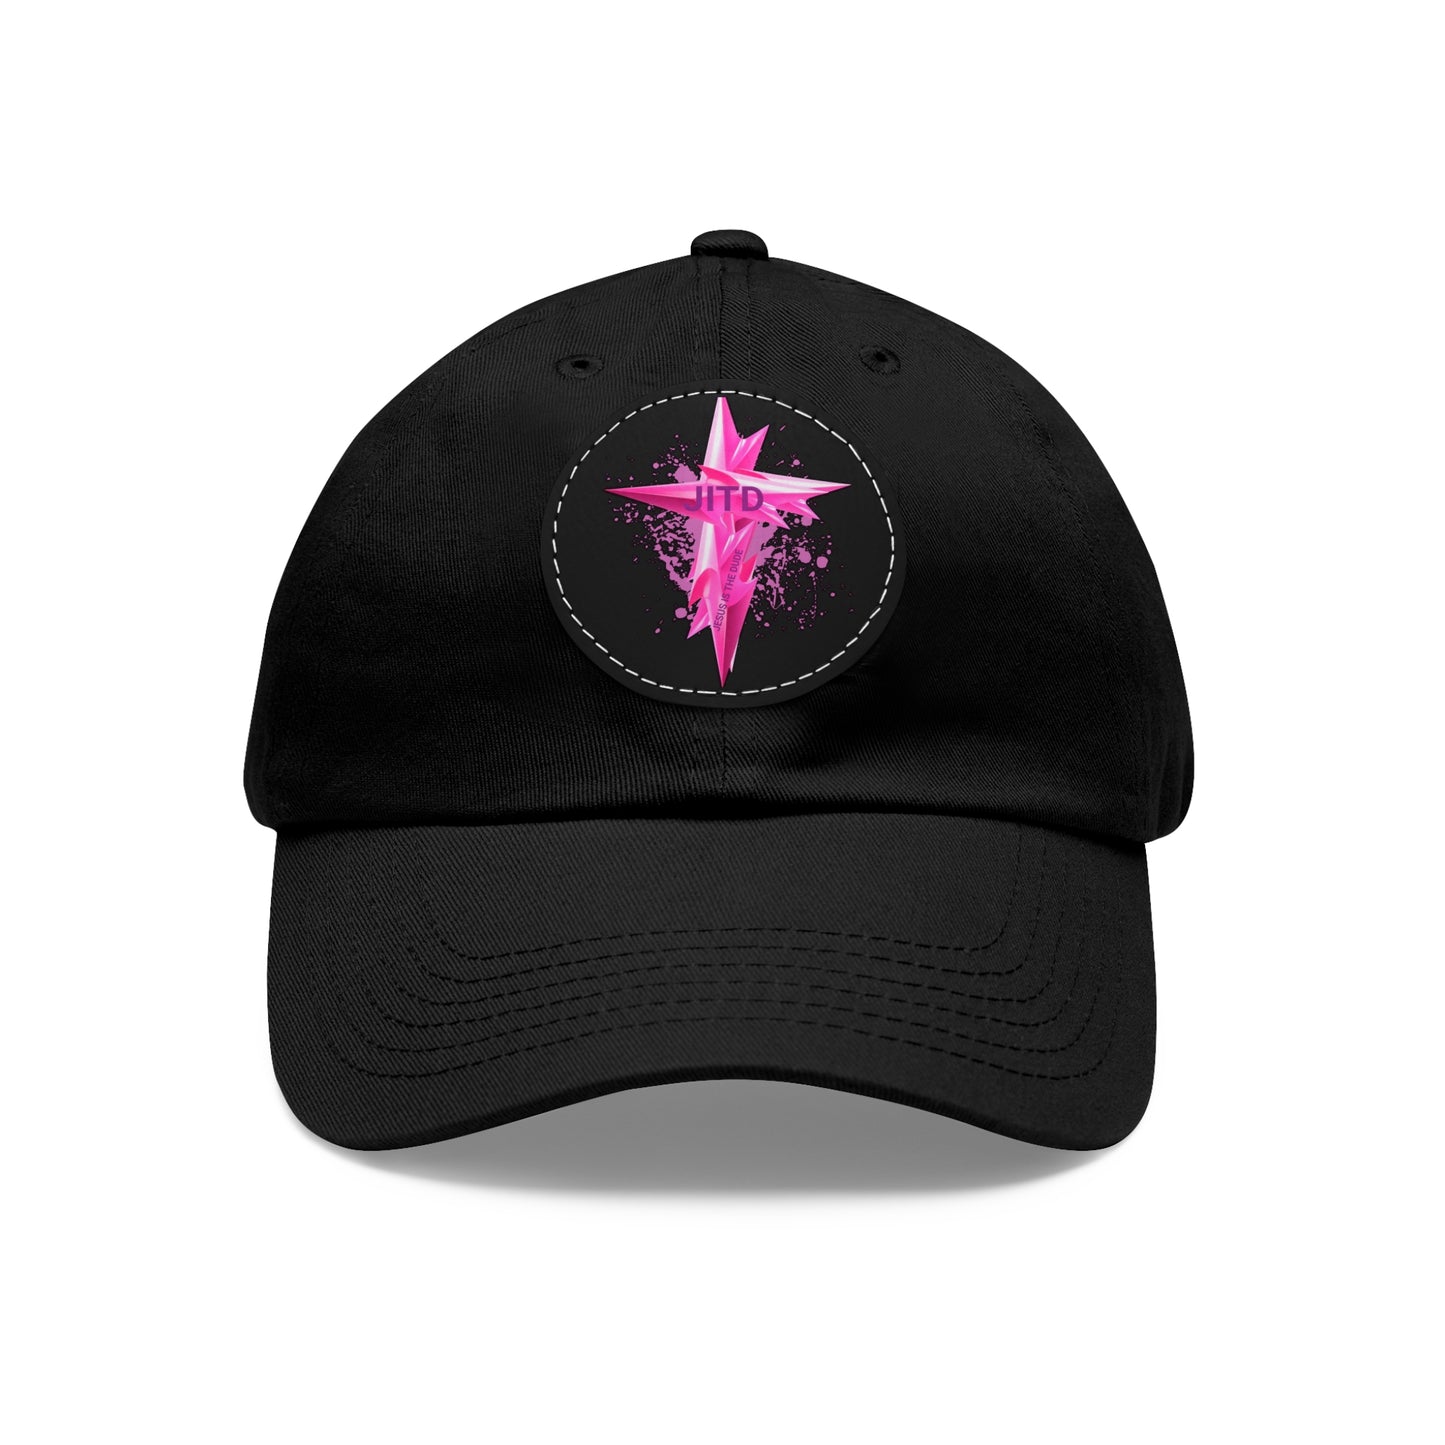 JITD STRIKE CROSS HAT WITH LEATHER PATCH